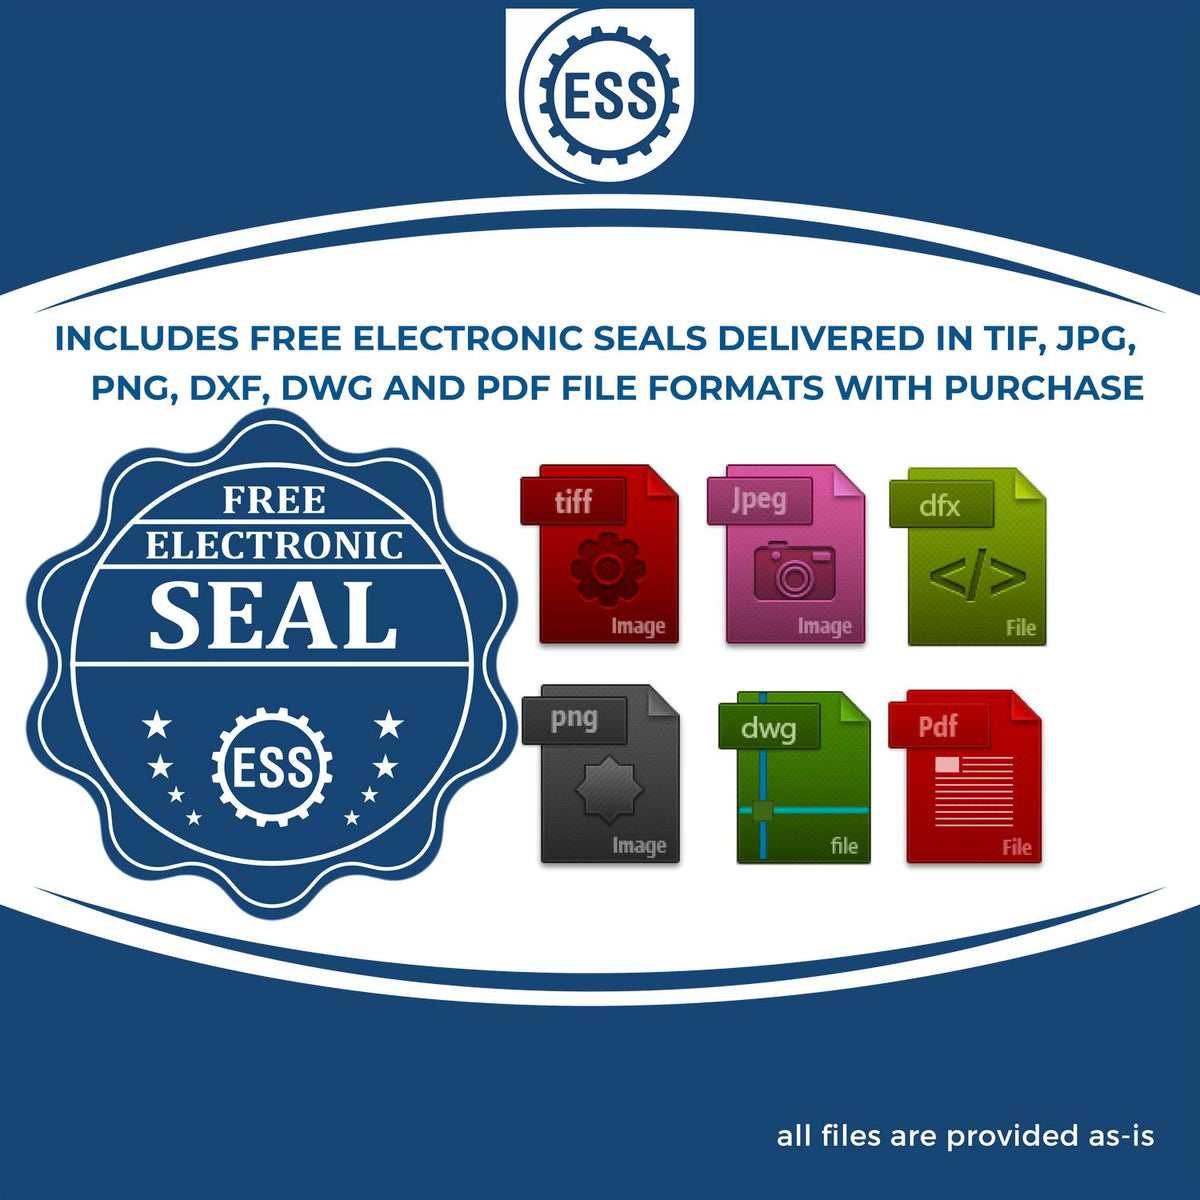 An infographic for the free electronic seal for the Hybrid North Dakota Architect Seal illustrating the different file type icons such as DXF, DWG, TIF, JPG and PNG.